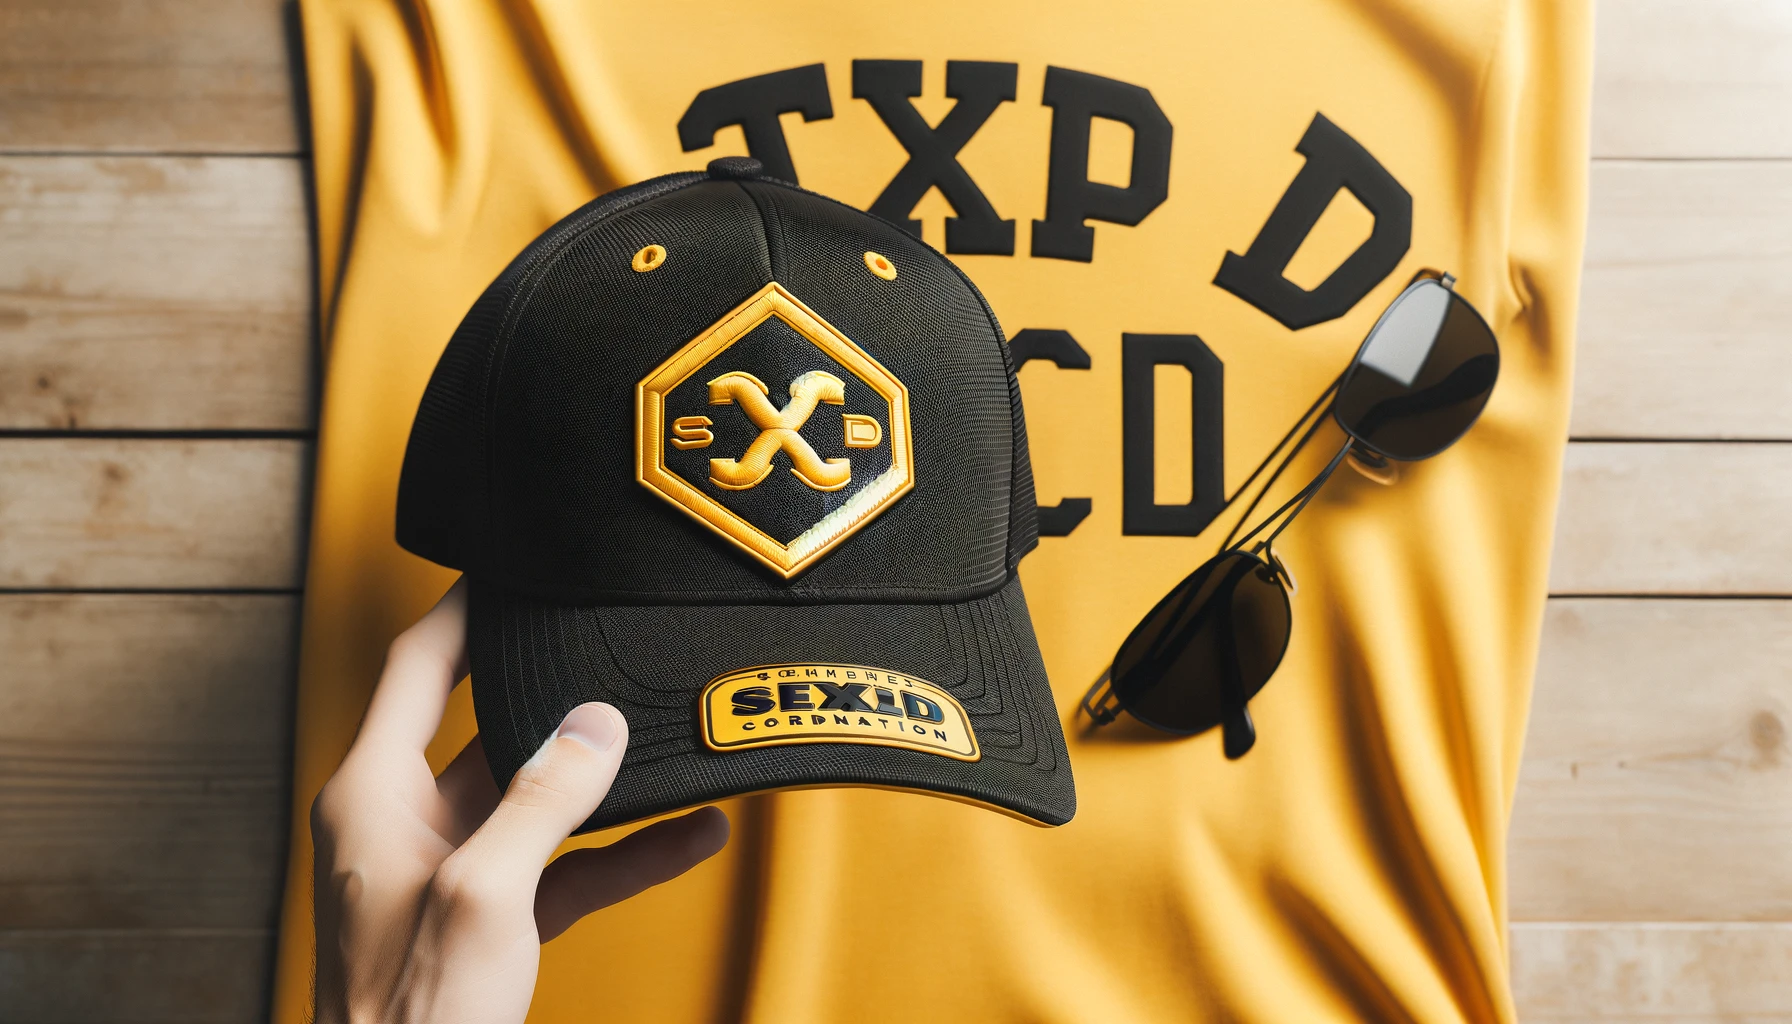 Summer coordination with a cap featuring a large yellow and black logo in the center, SxD letters included, with the front logo blurred, missing, or not visible. Horizontal aspect ratio (16:9).